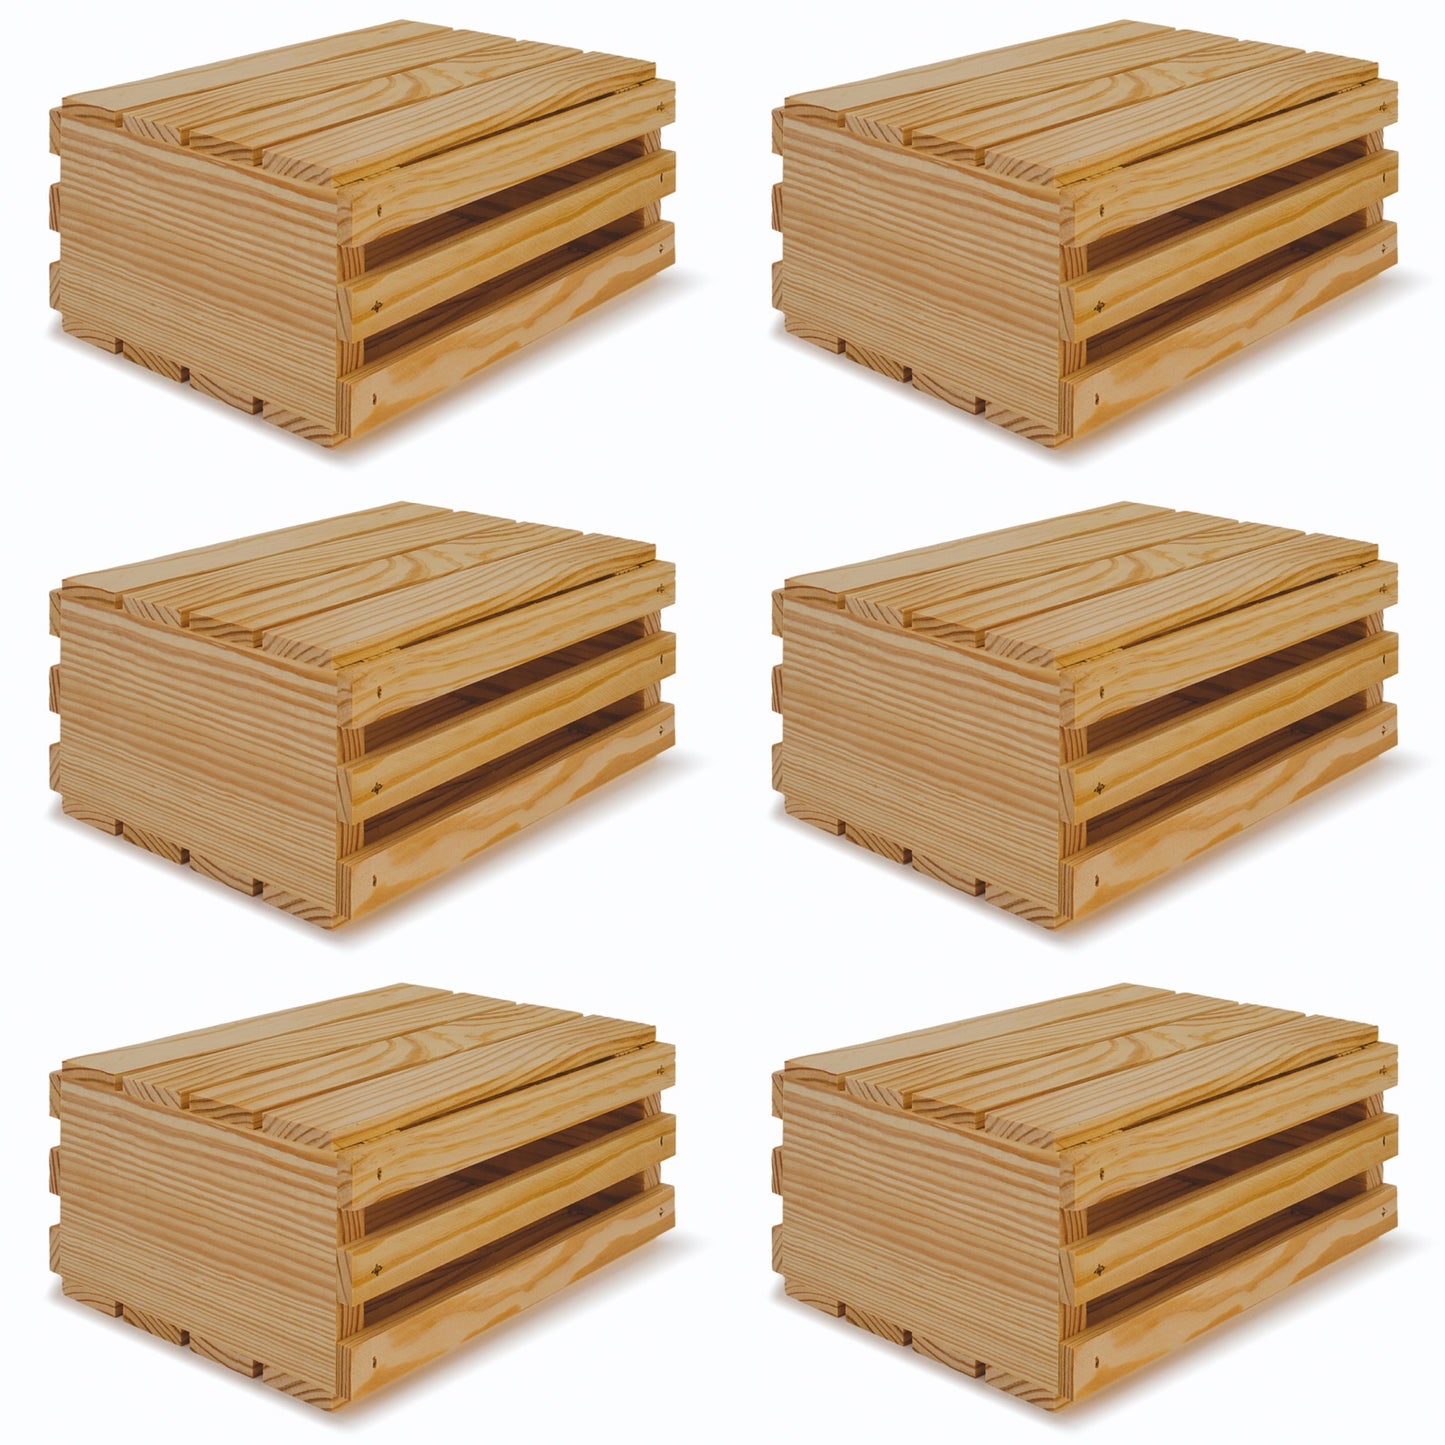 6 Small wooden crates with lid 10x8x4.5, 6-SS-10-8-4.5-NX-NW-LL, 12-SS-10-8-4.5-NX-NW-LL, 24-SS-10-8-4.5-NX-NW-LL, 48-SS-10-8-4.5-NX-NW-LL, 96-SS-10-8-4.5-NX-NW-LL